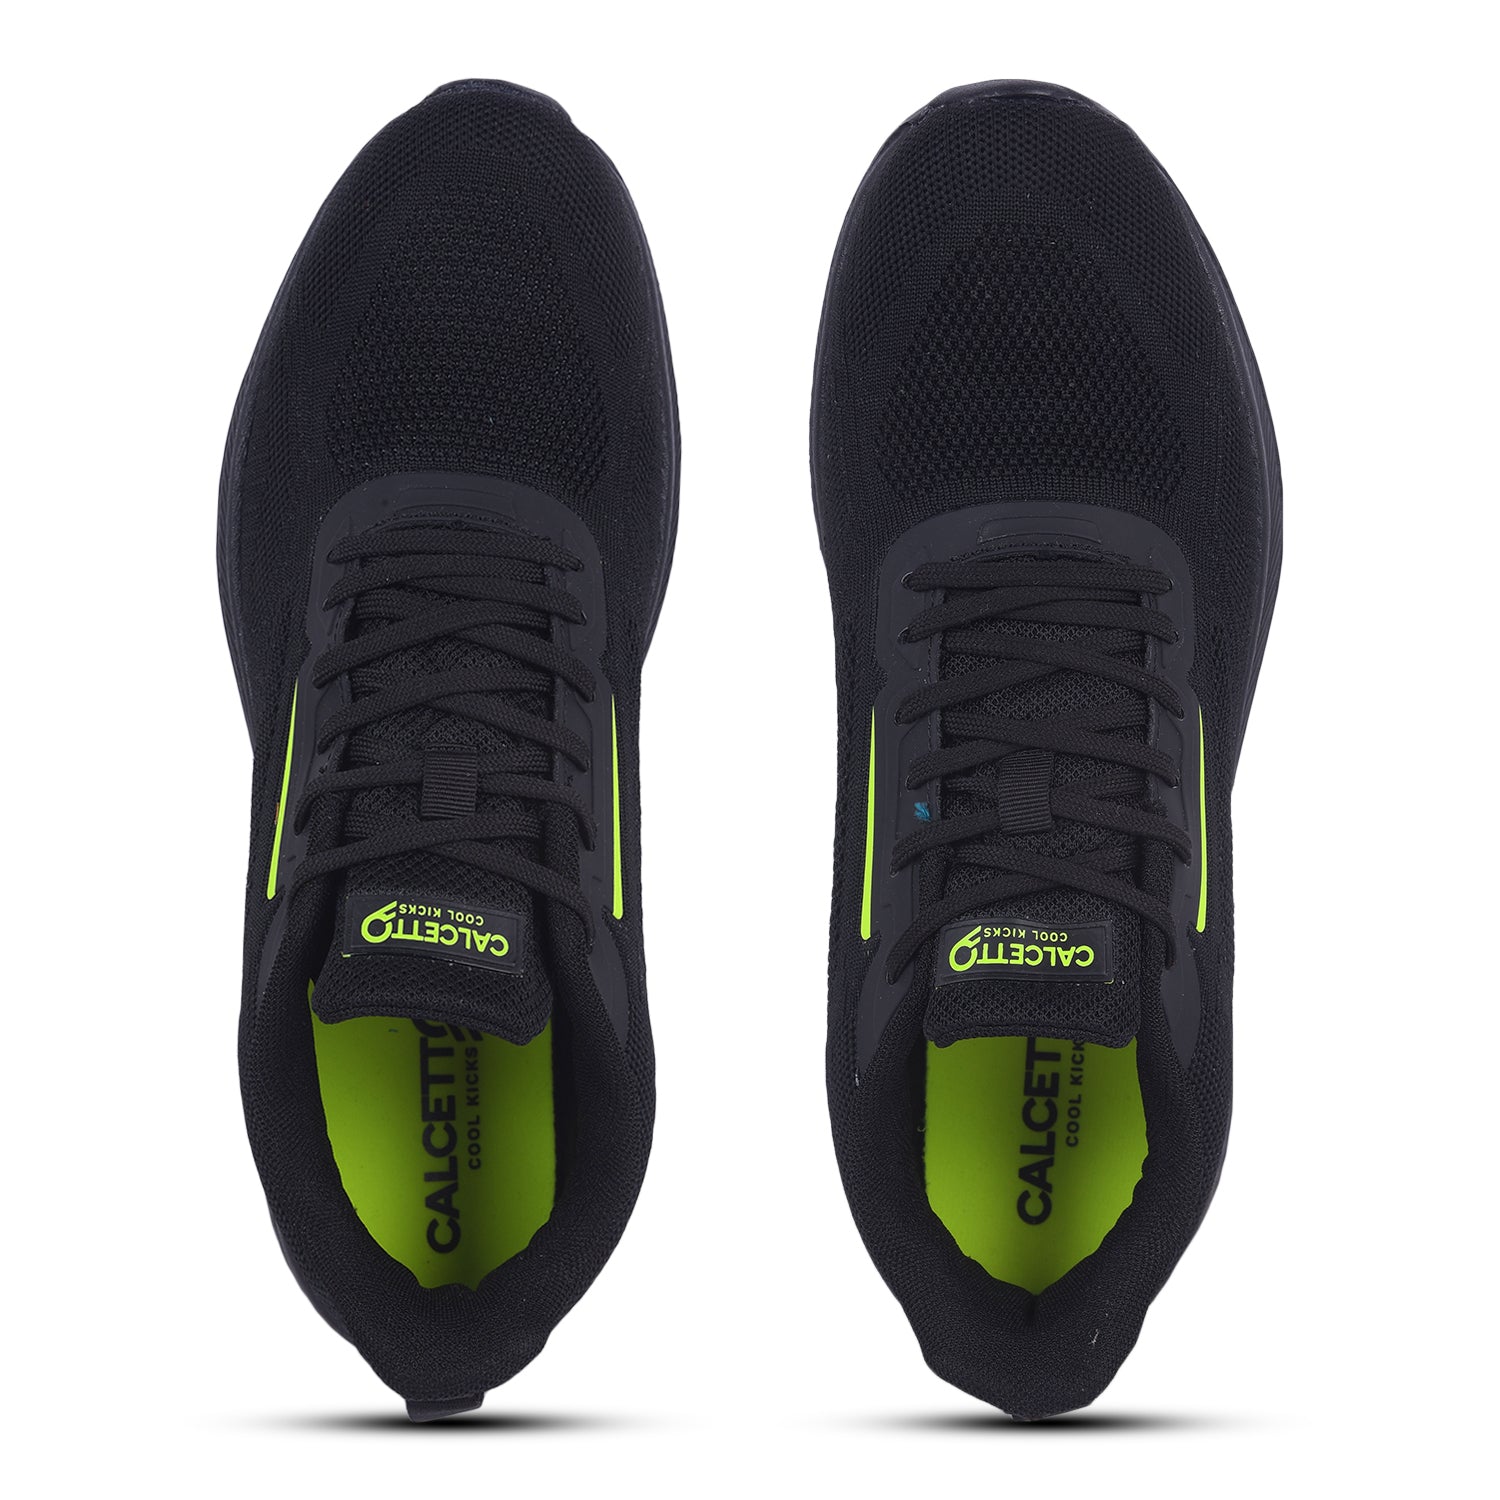 Calcetto CLT-2046 Black Lime Sports Shoes For Men